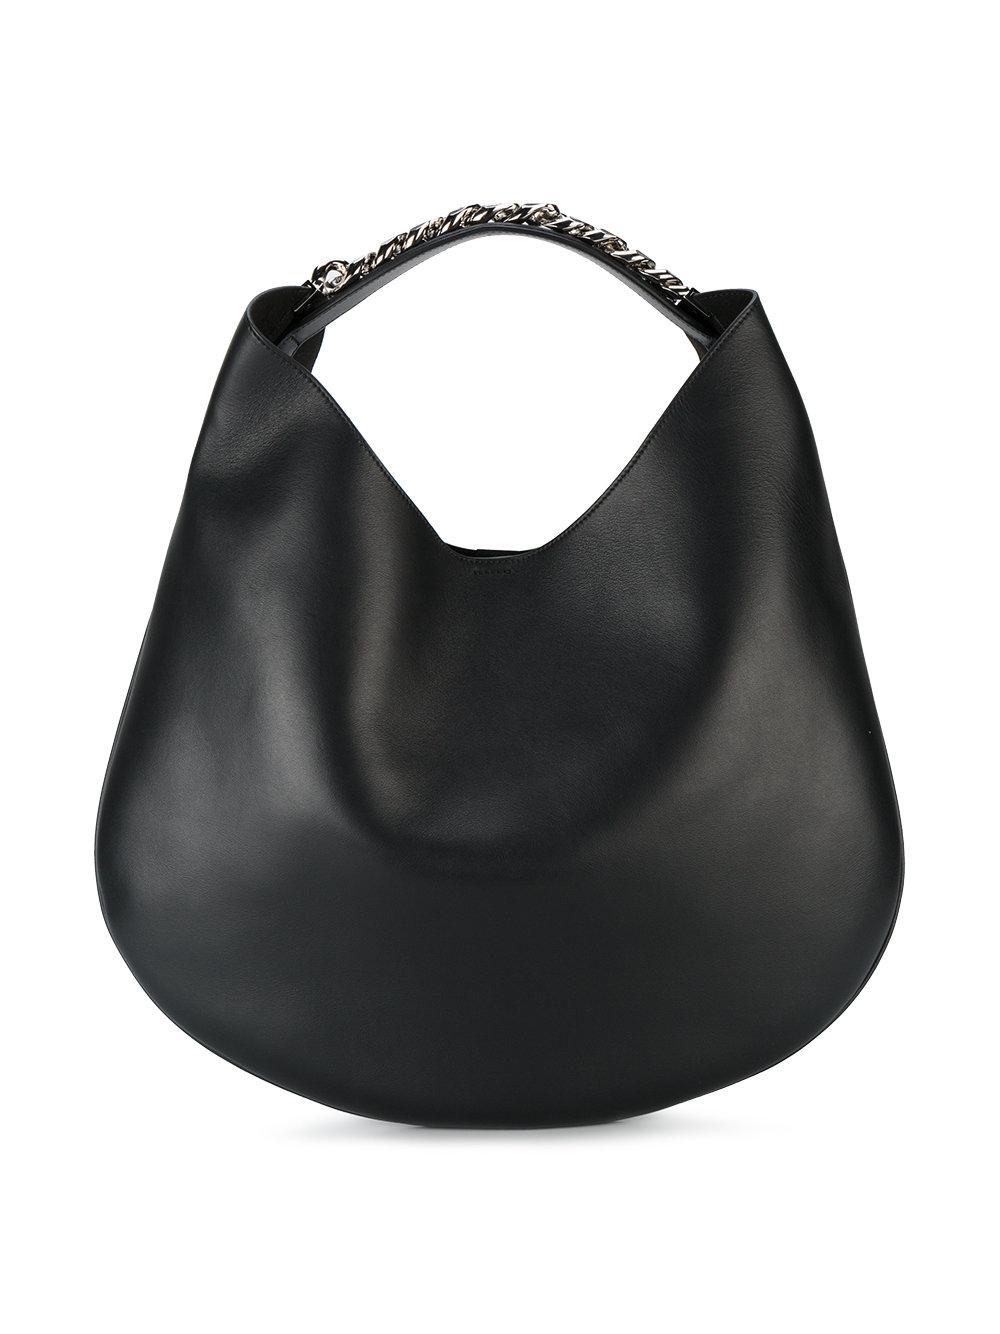 Givenchy Leather Infinity Hobo Bag in Black - Lyst